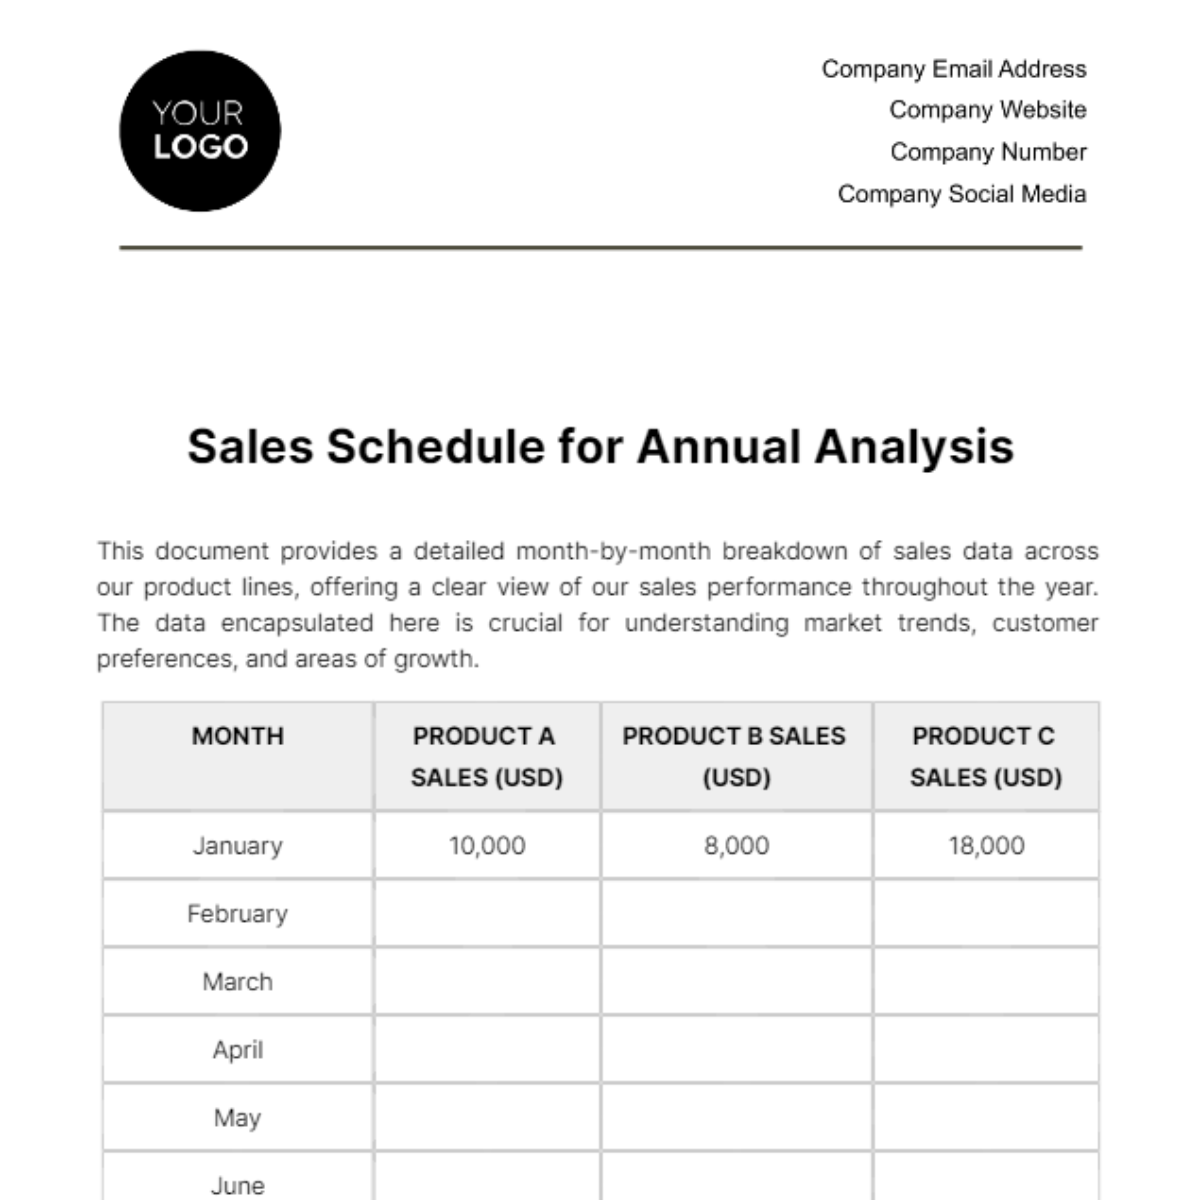 Free Sales Schedule for Annual Analysis Template